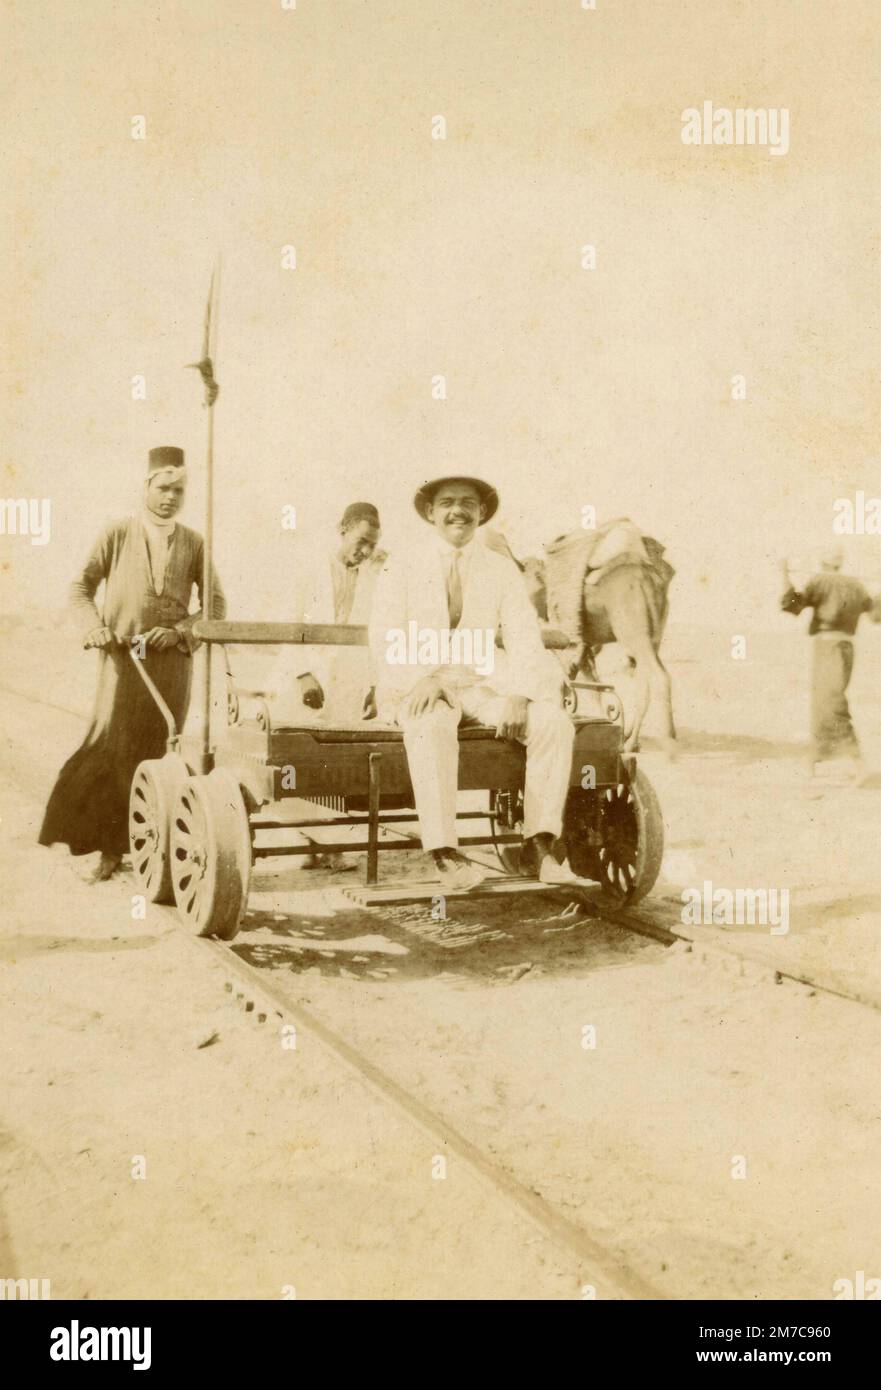 Man onboard a railway trolley pushed by locals, Egypt 1920s Stock Photo